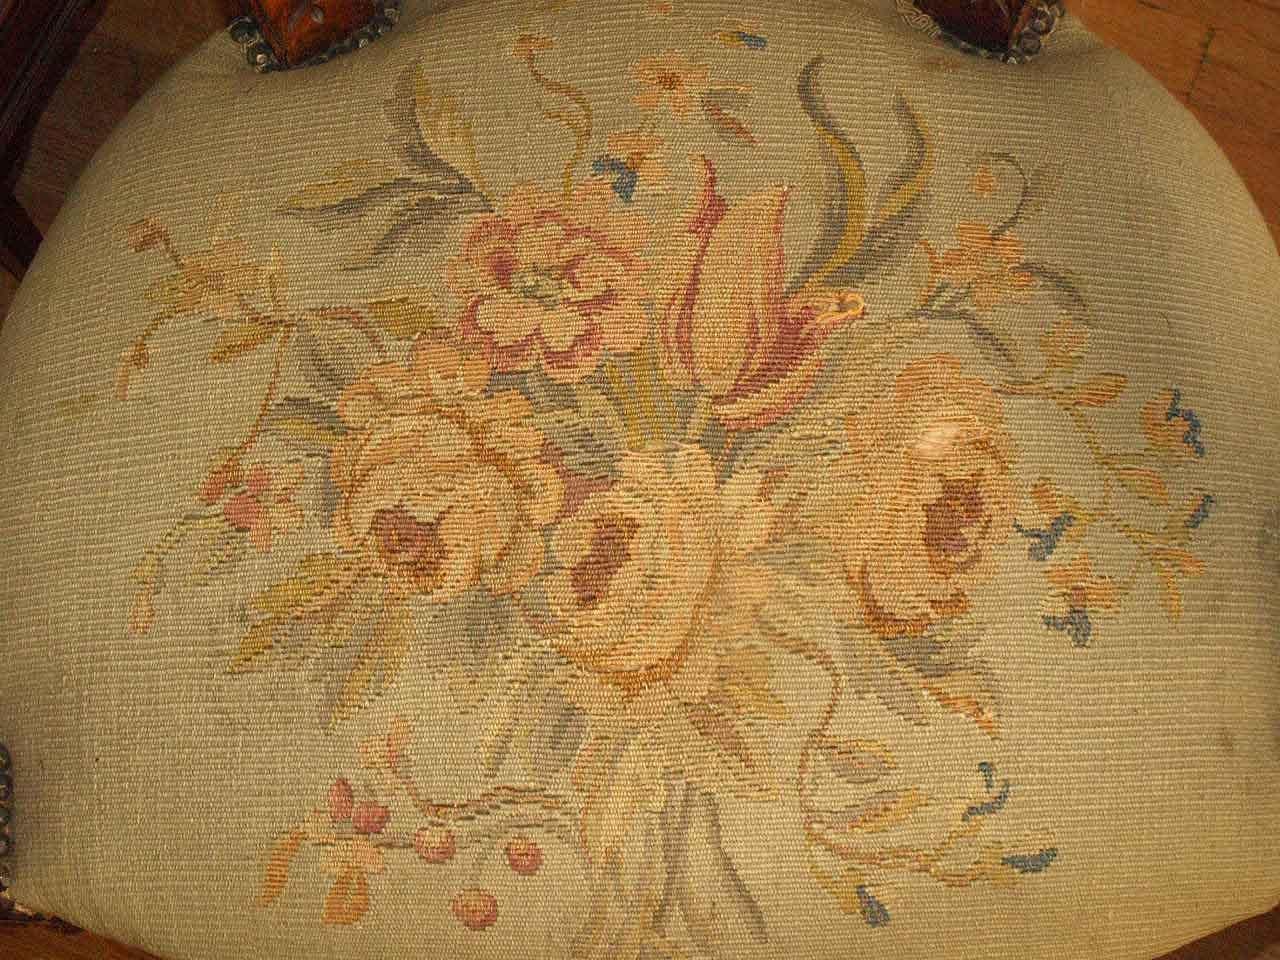 20th Century French Aubusson Tapestry Armchair For Sale